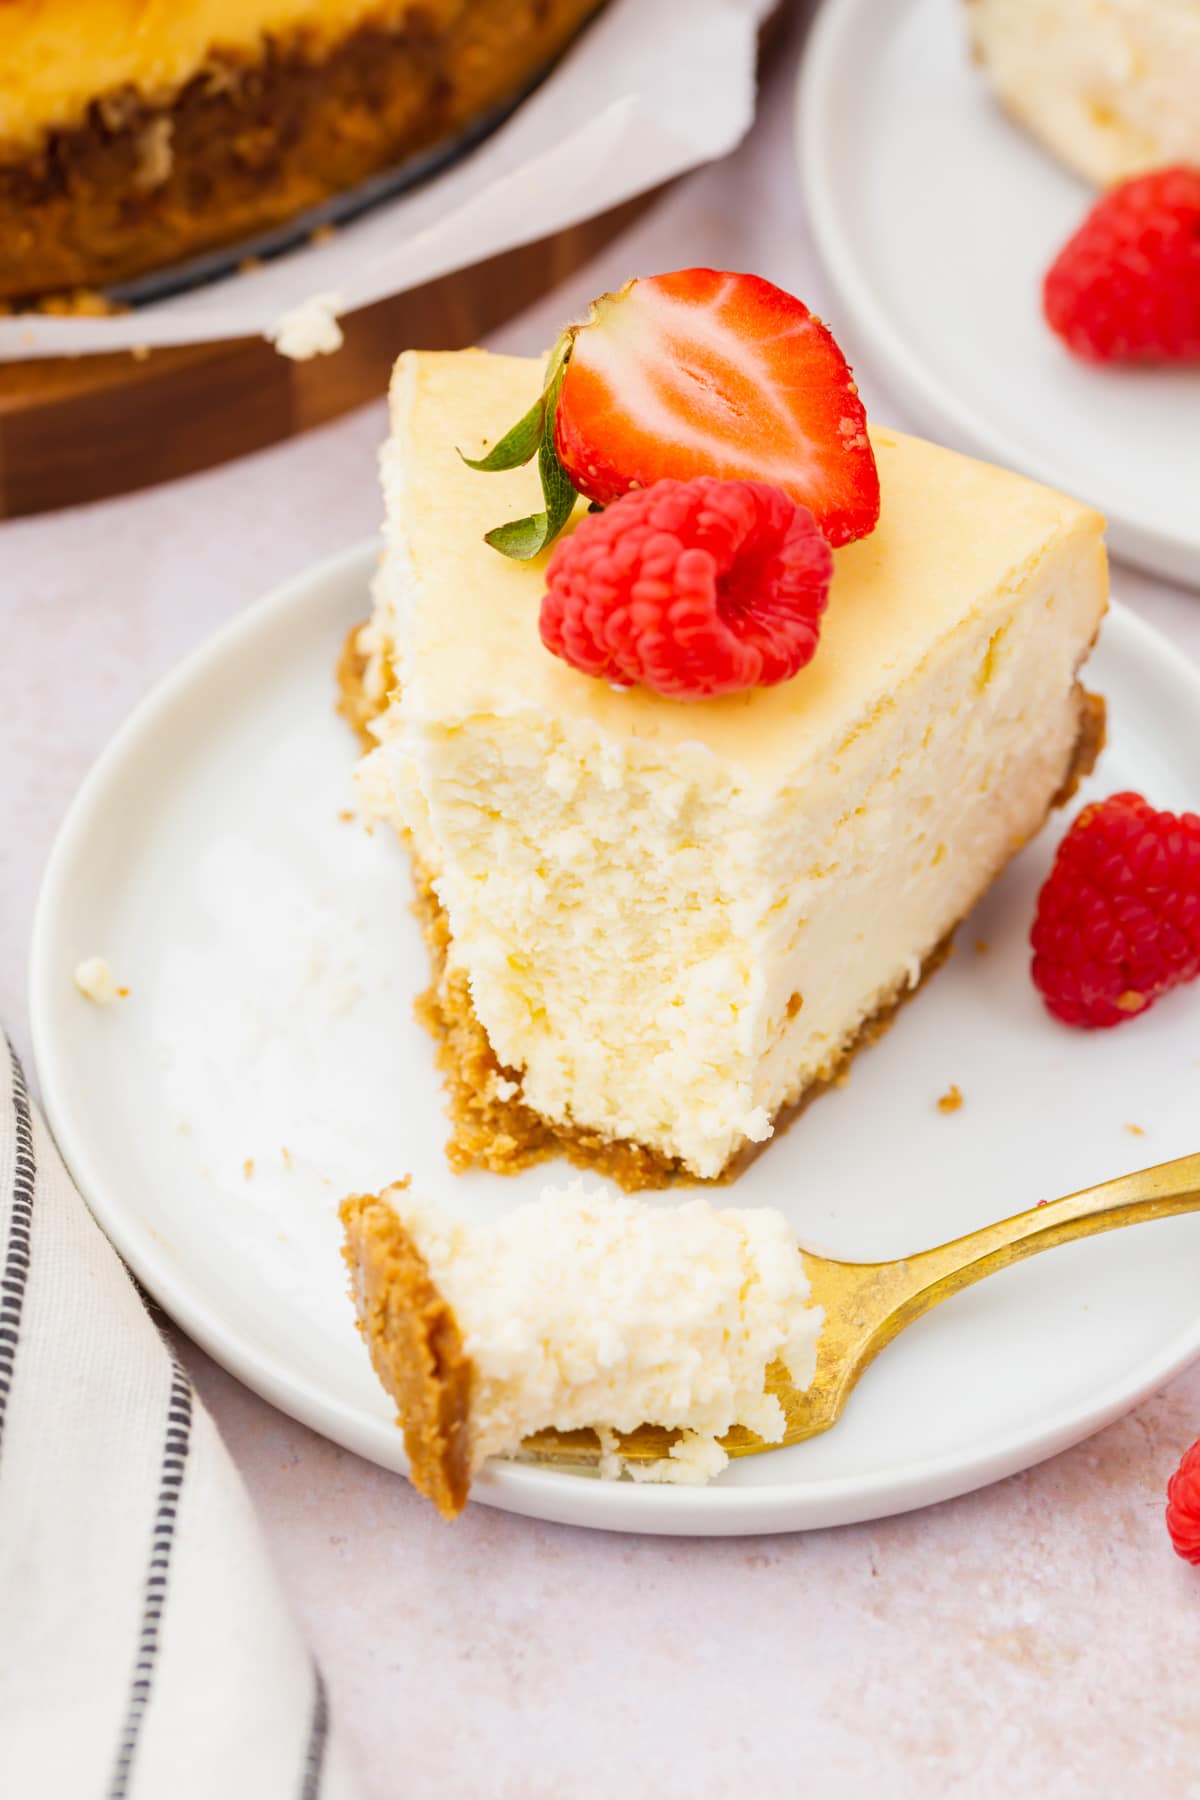 A slice of gluten-free cheesecake topped with red berries.